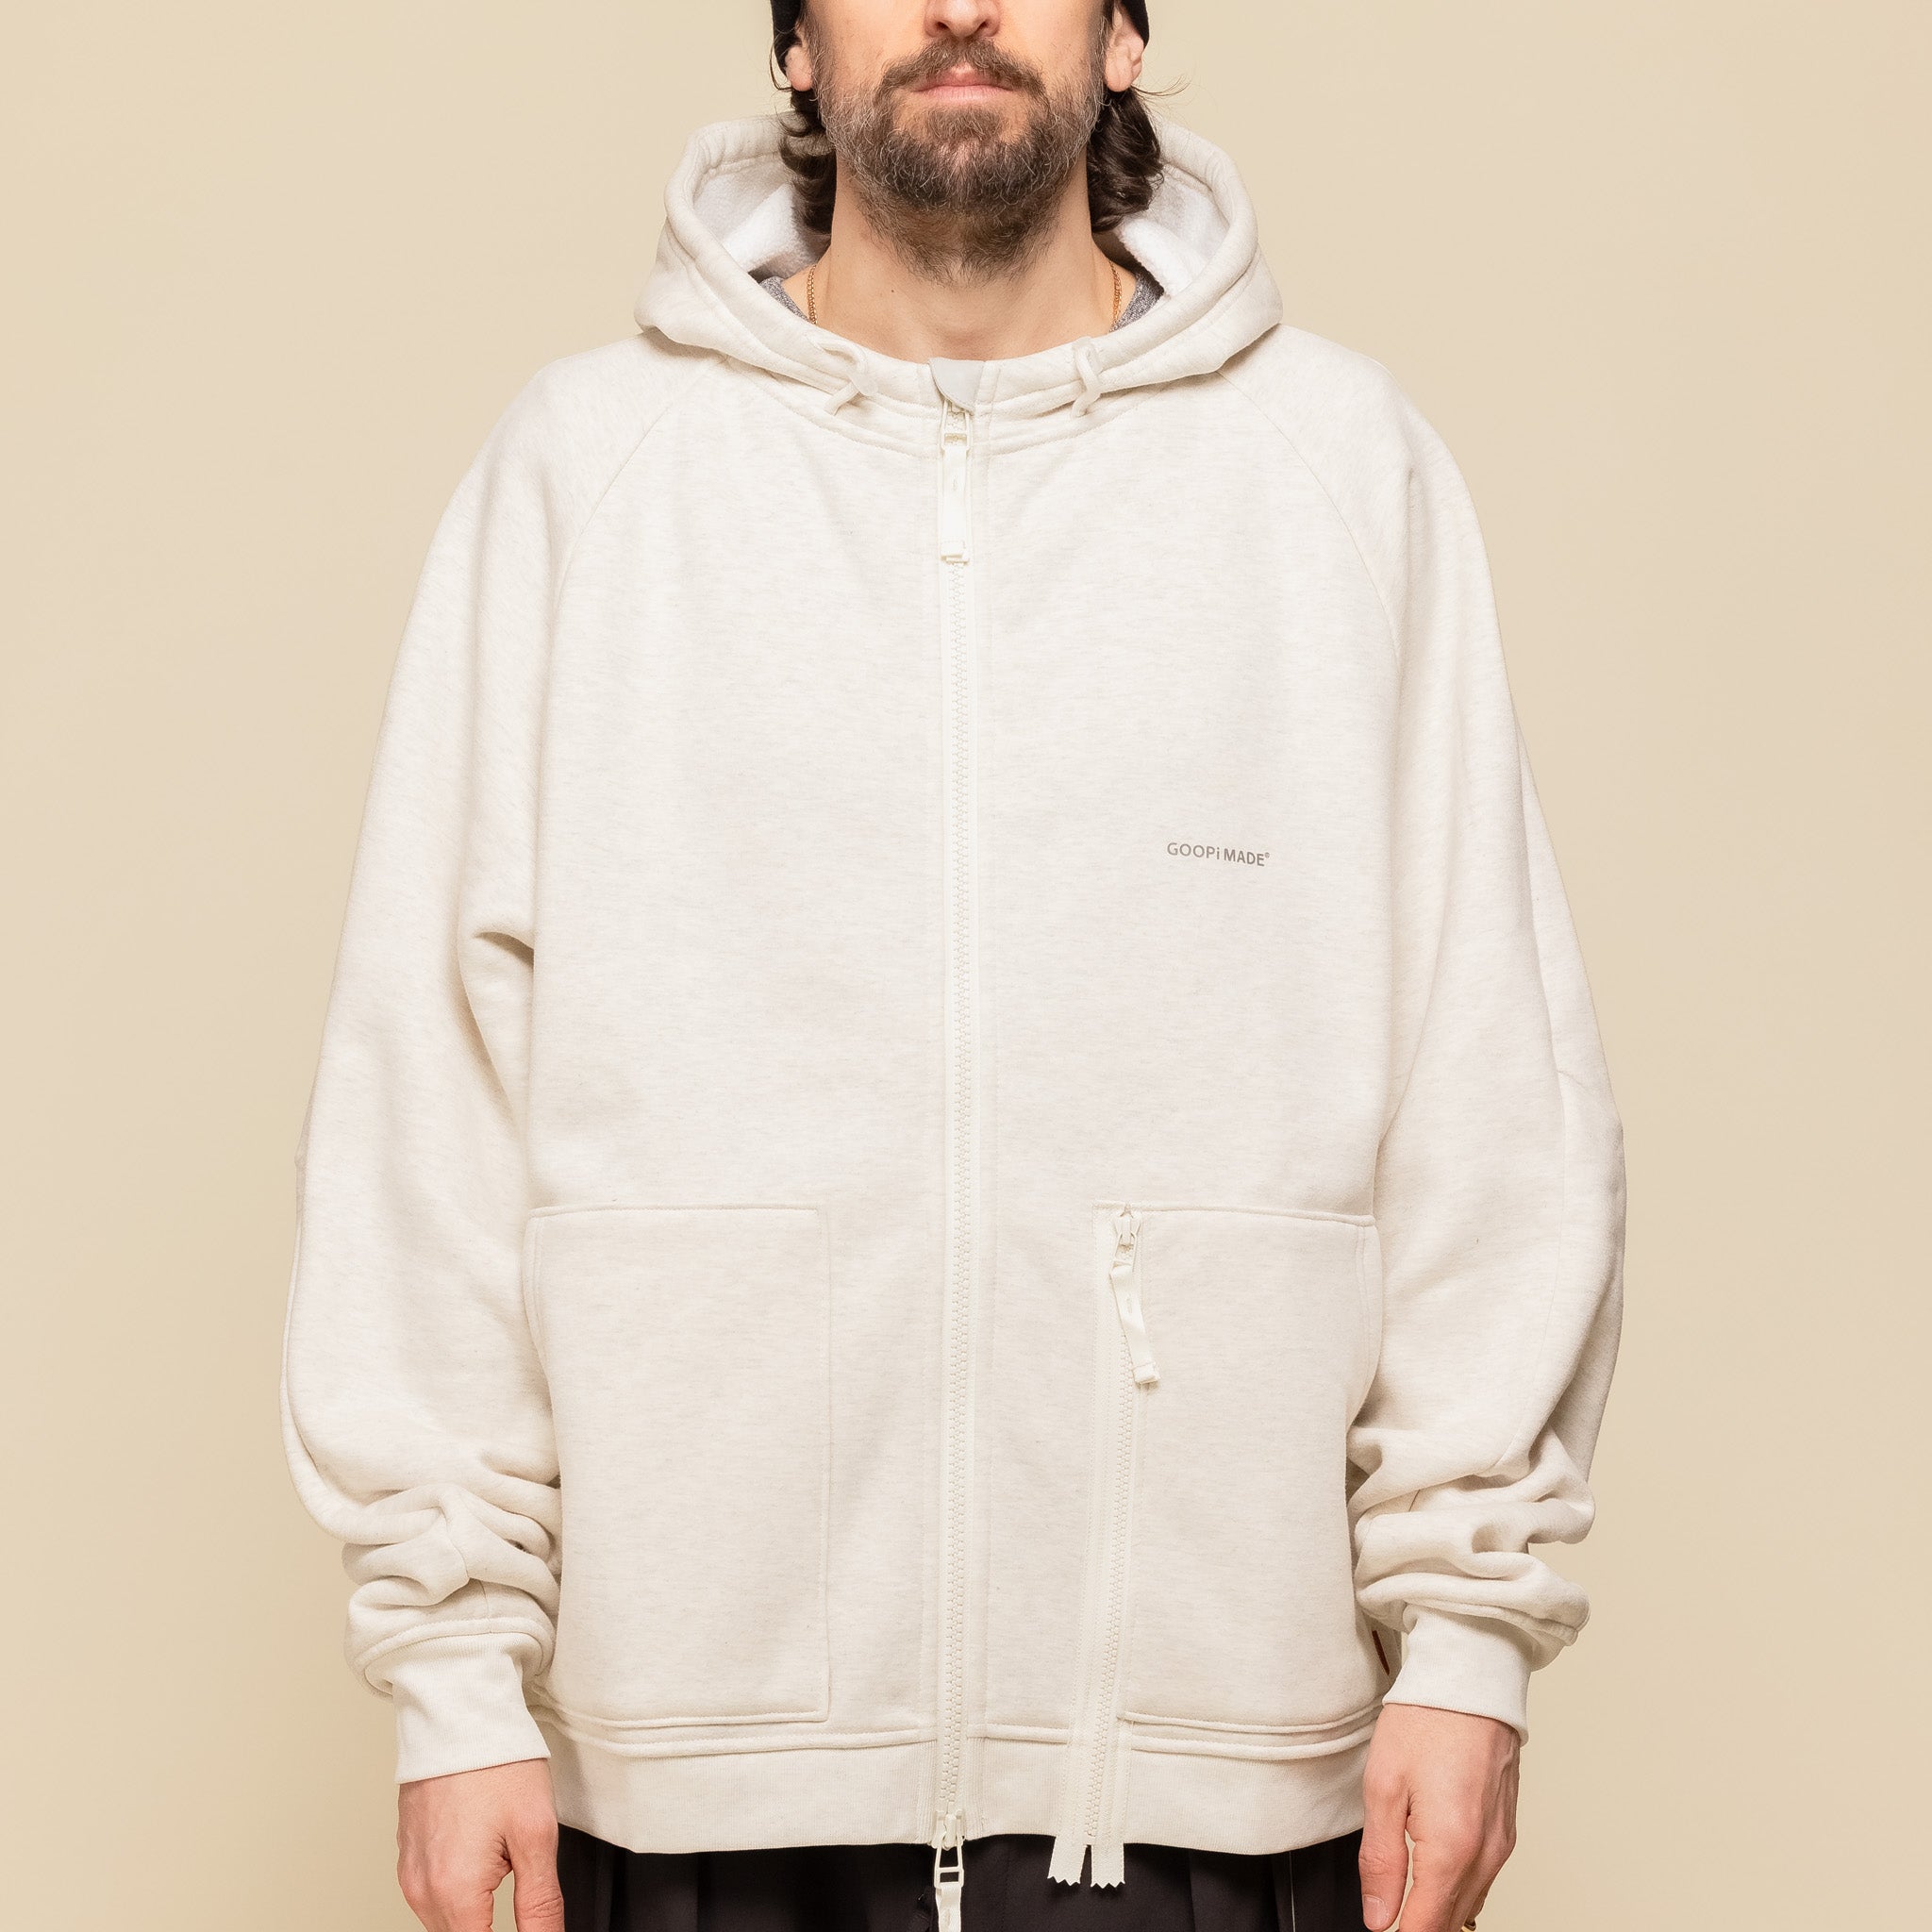 GOOPiMADE - “MEquip-H3” Mantle Logo Hooded Jacket - Ivory